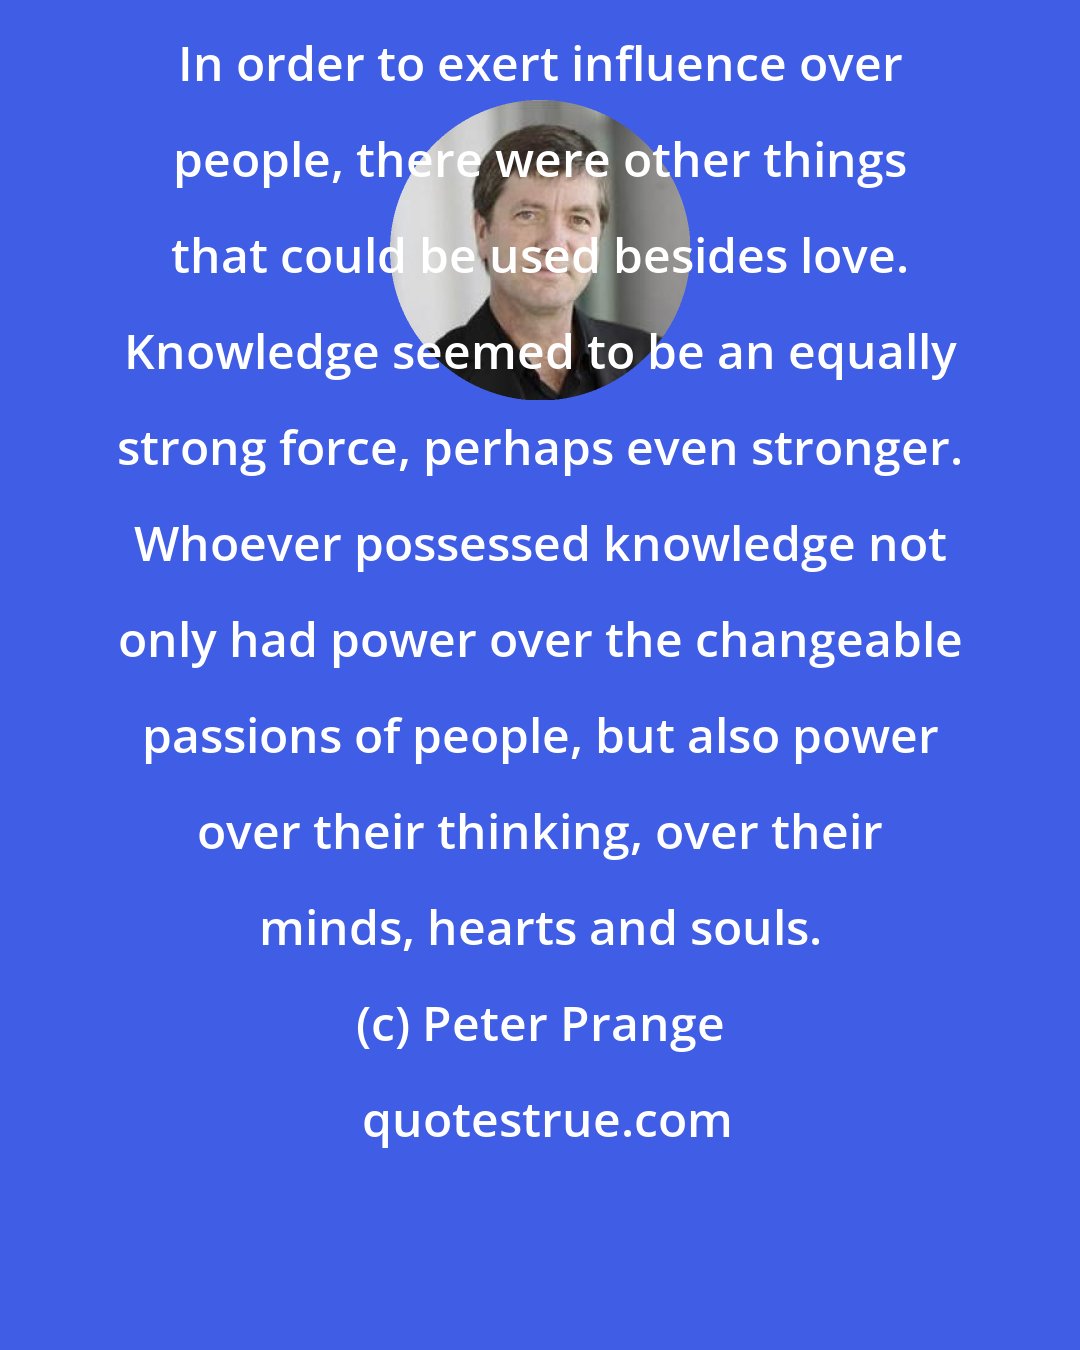 Peter Prange: In order to exert influence over people, there were other things that could be used besides love. Knowledge seemed to be an equally strong force, perhaps even stronger. Whoever possessed knowledge not only had power over the changeable passions of people, but also power over their thinking, over their minds, hearts and souls.